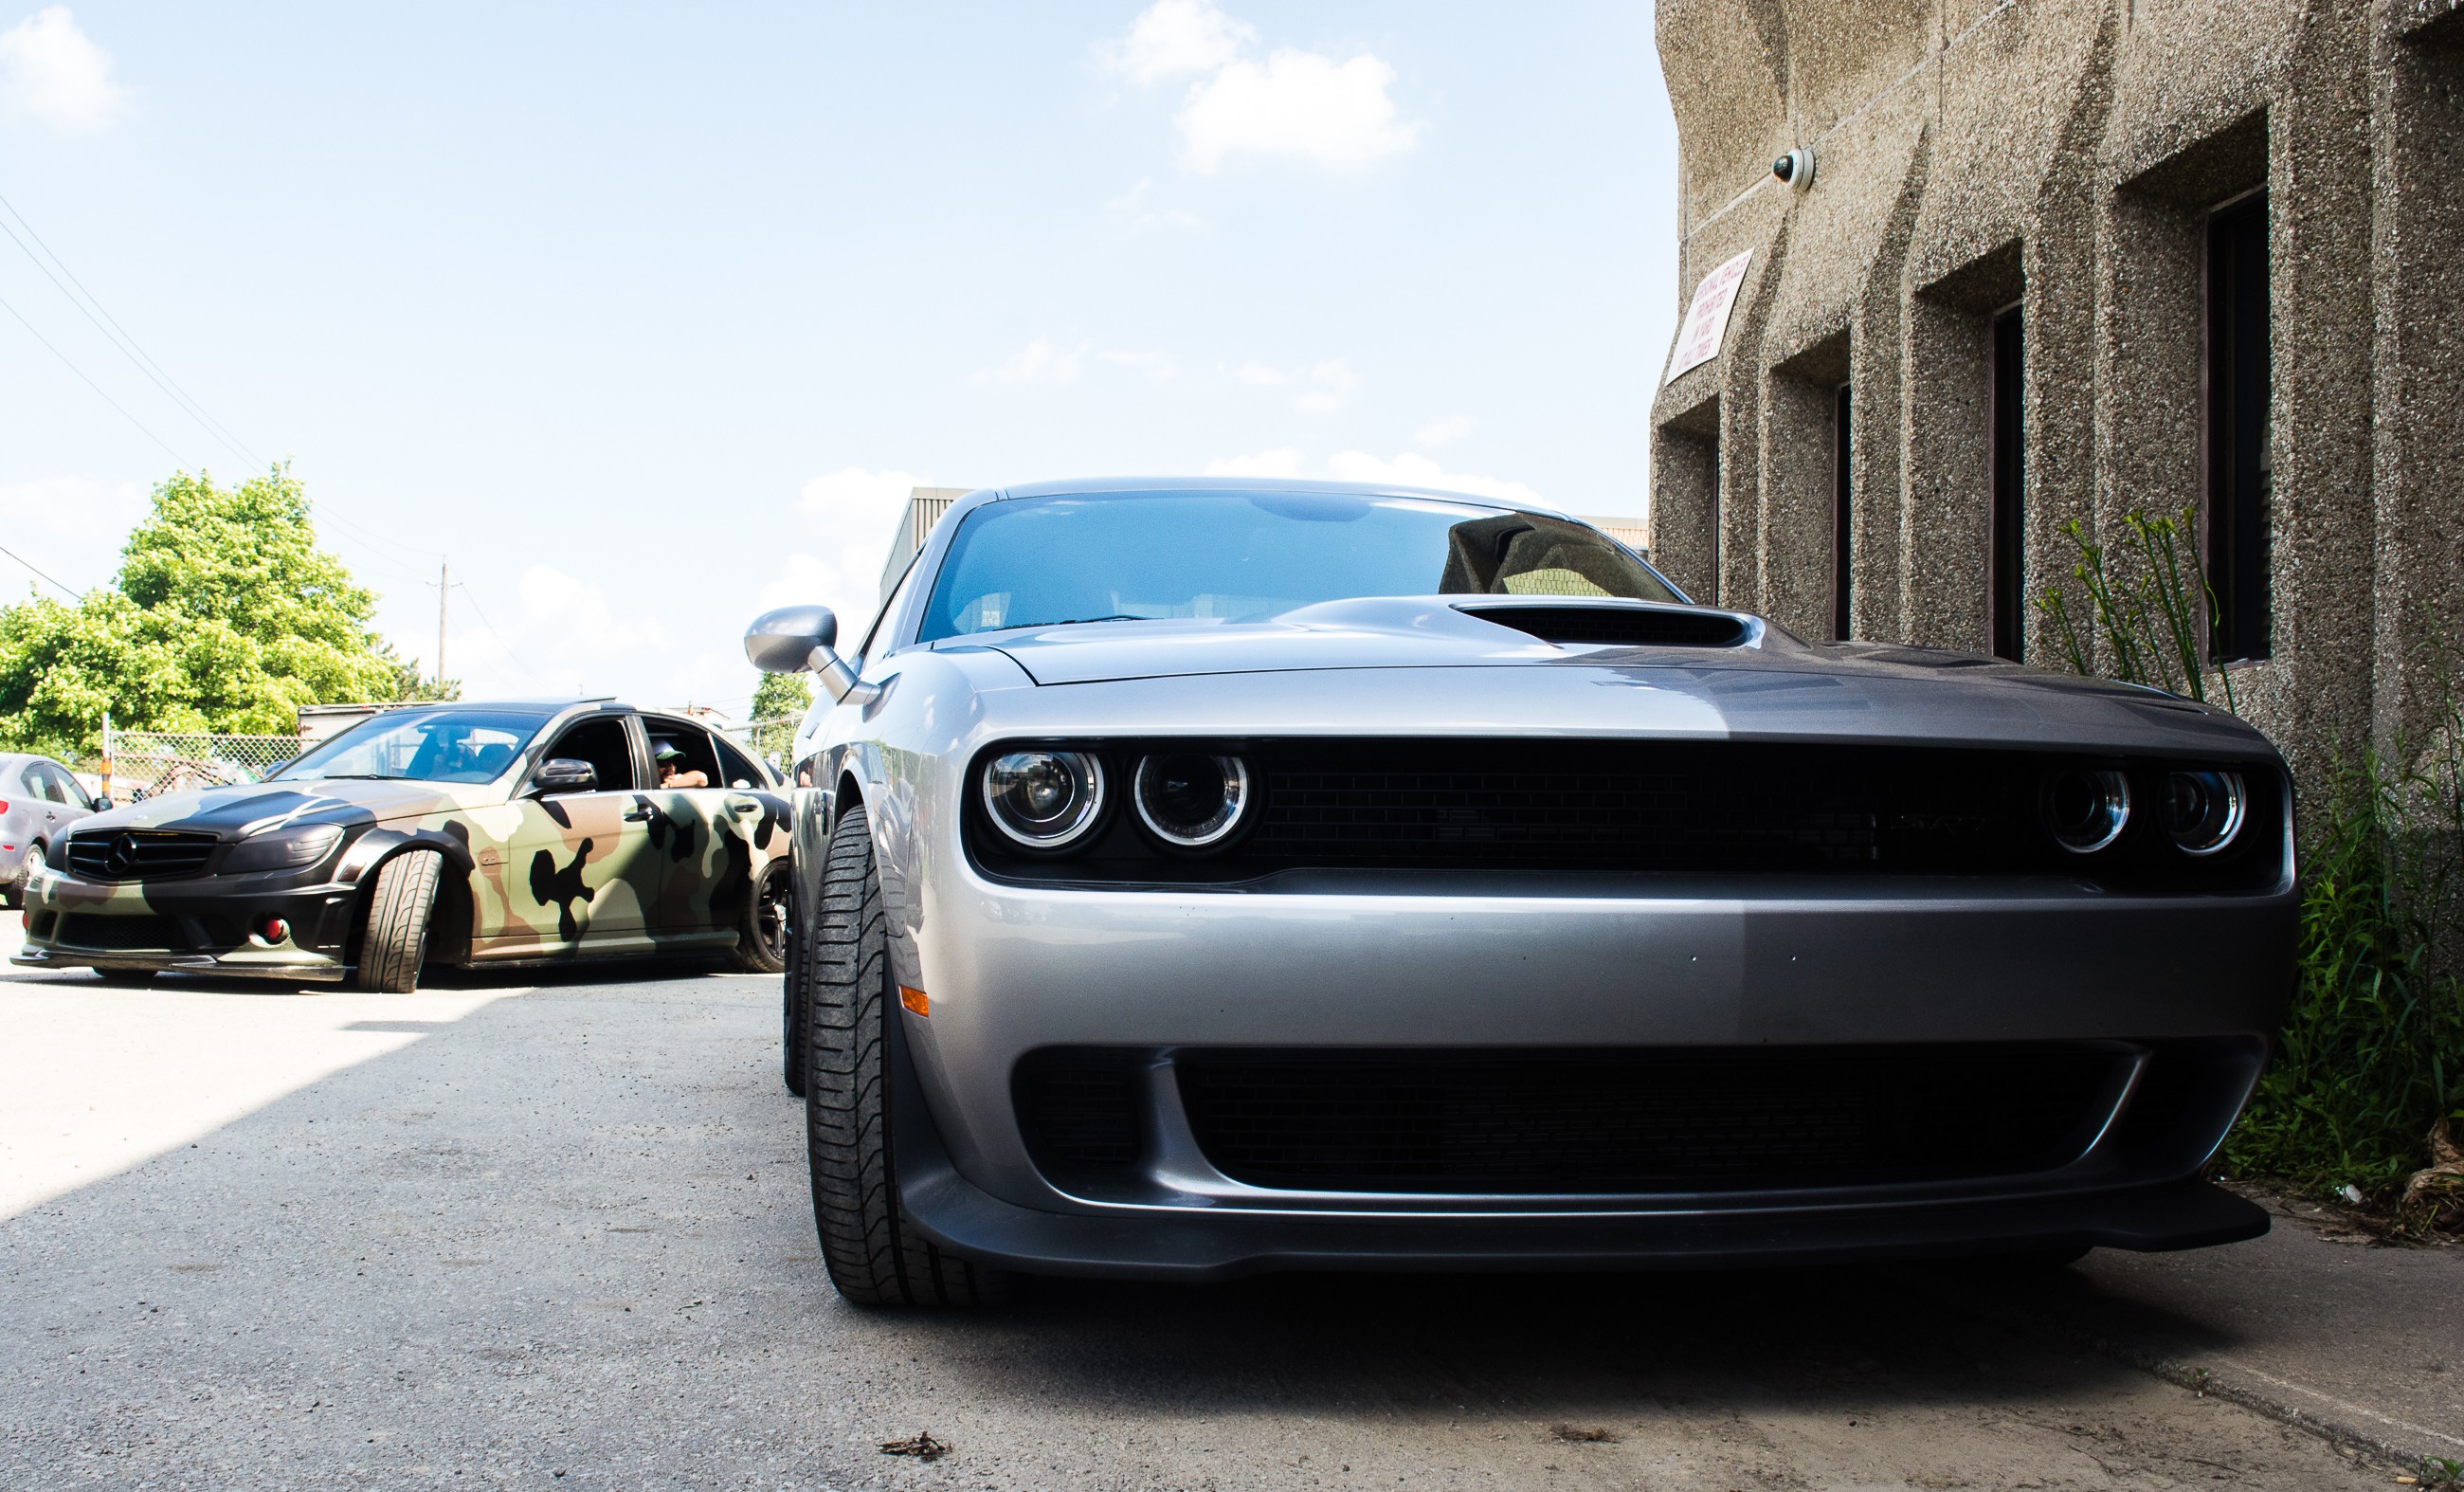 Dodge Challenger Hellcat, Dodge, Dodge Challenger, SRT, Mercedes C63 AMG, Mercedes AMG, Mercedes Benz, C63 AMG, Camouflage, Challenger, Muscle Cars, Supercars, Luxury Cars, Exotic, Car, Transport, Race Cars Wallpaper